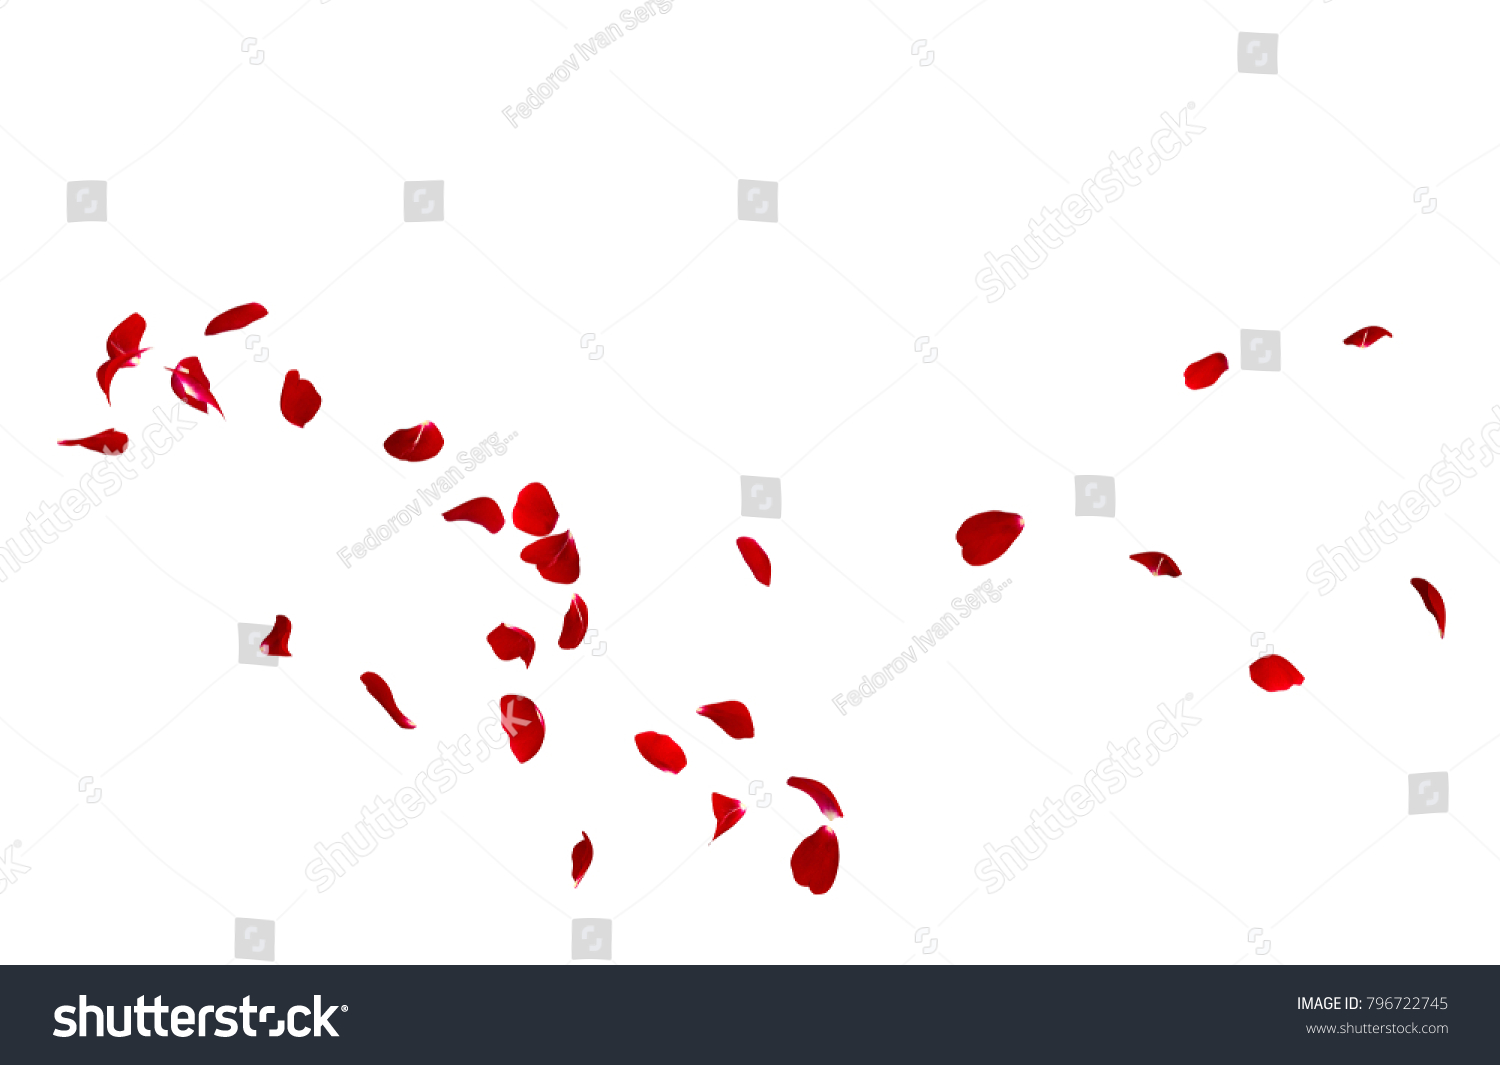 Red rose petals fly in a circle. The center free space for Your photos or text. Isolated white background #796722745